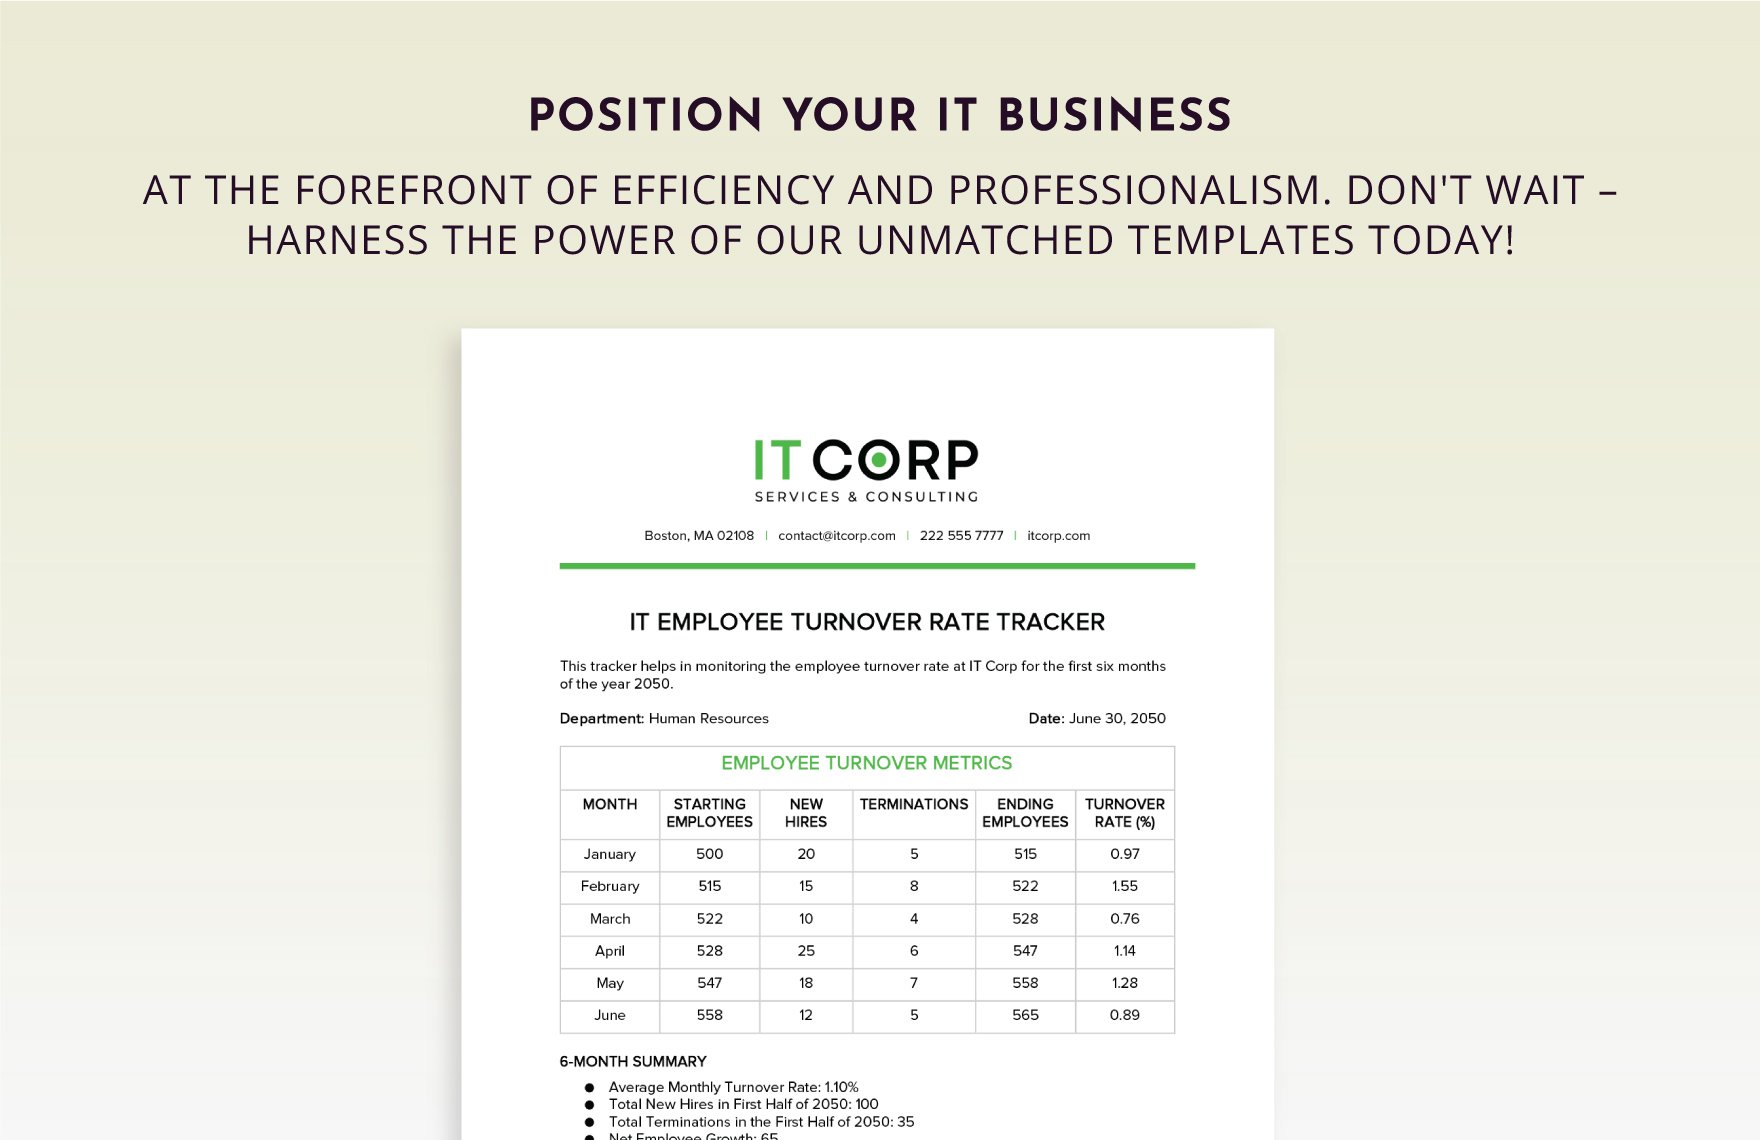 IT Employee Turnover Rate Tracker Template